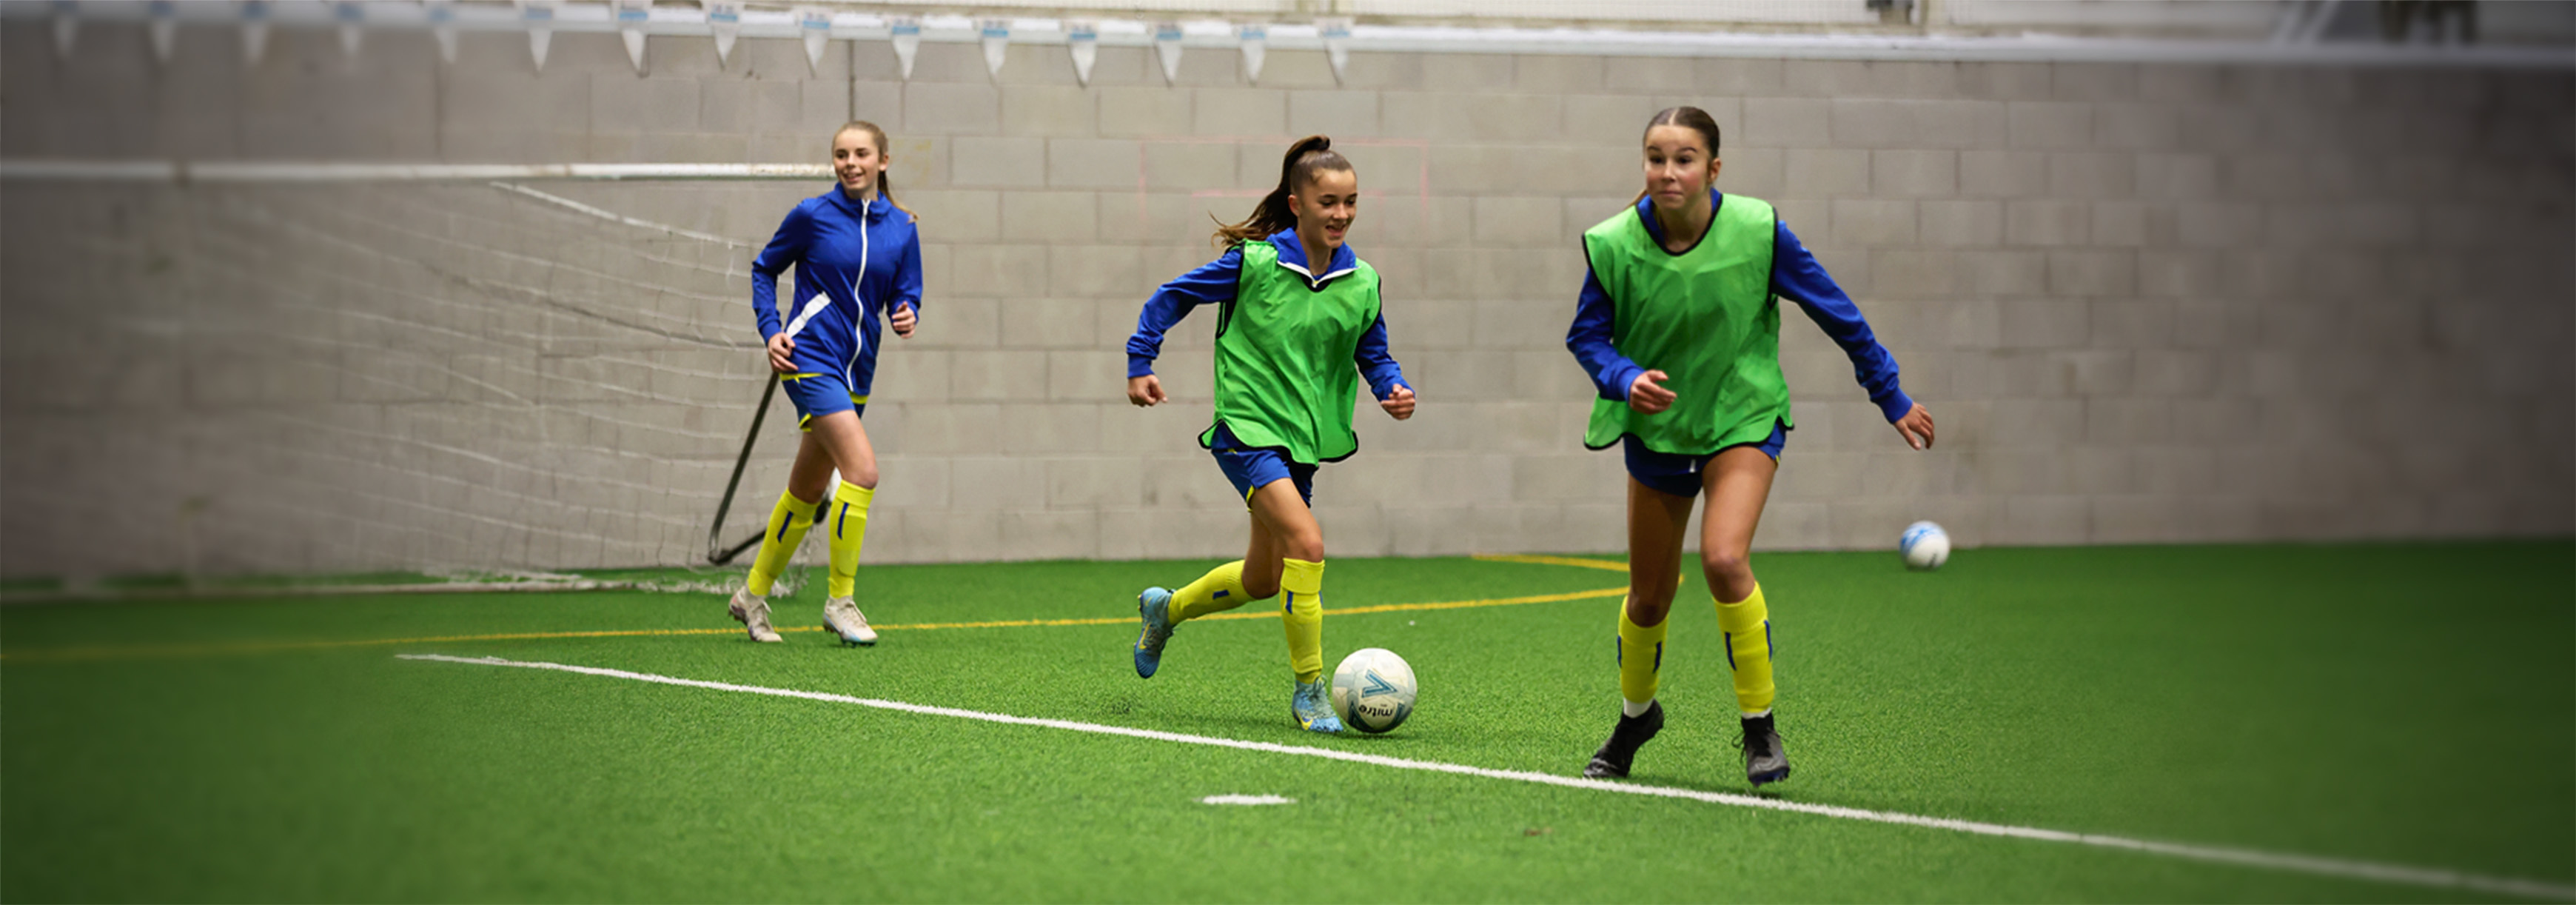 During training on an indoor pitch, one girl runs forward with the ball while two others move forward looking to receive a pass.